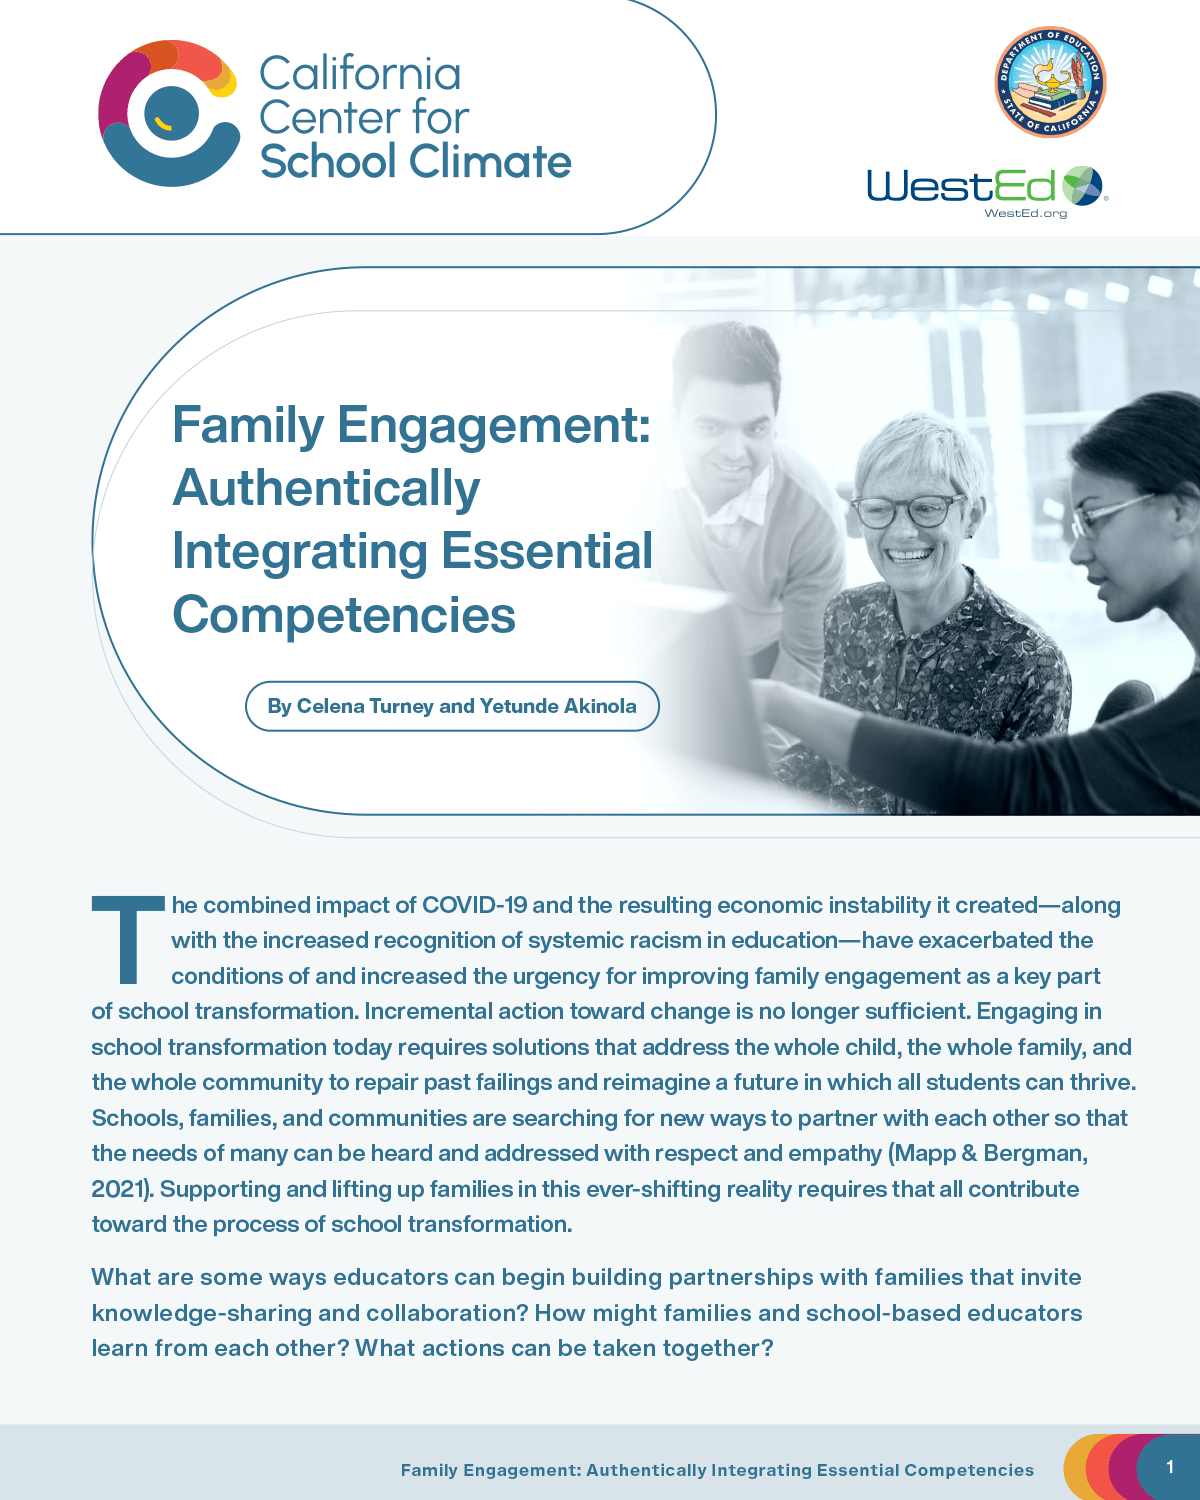 Family Engagement: Authentically Integrating Essential Competencies